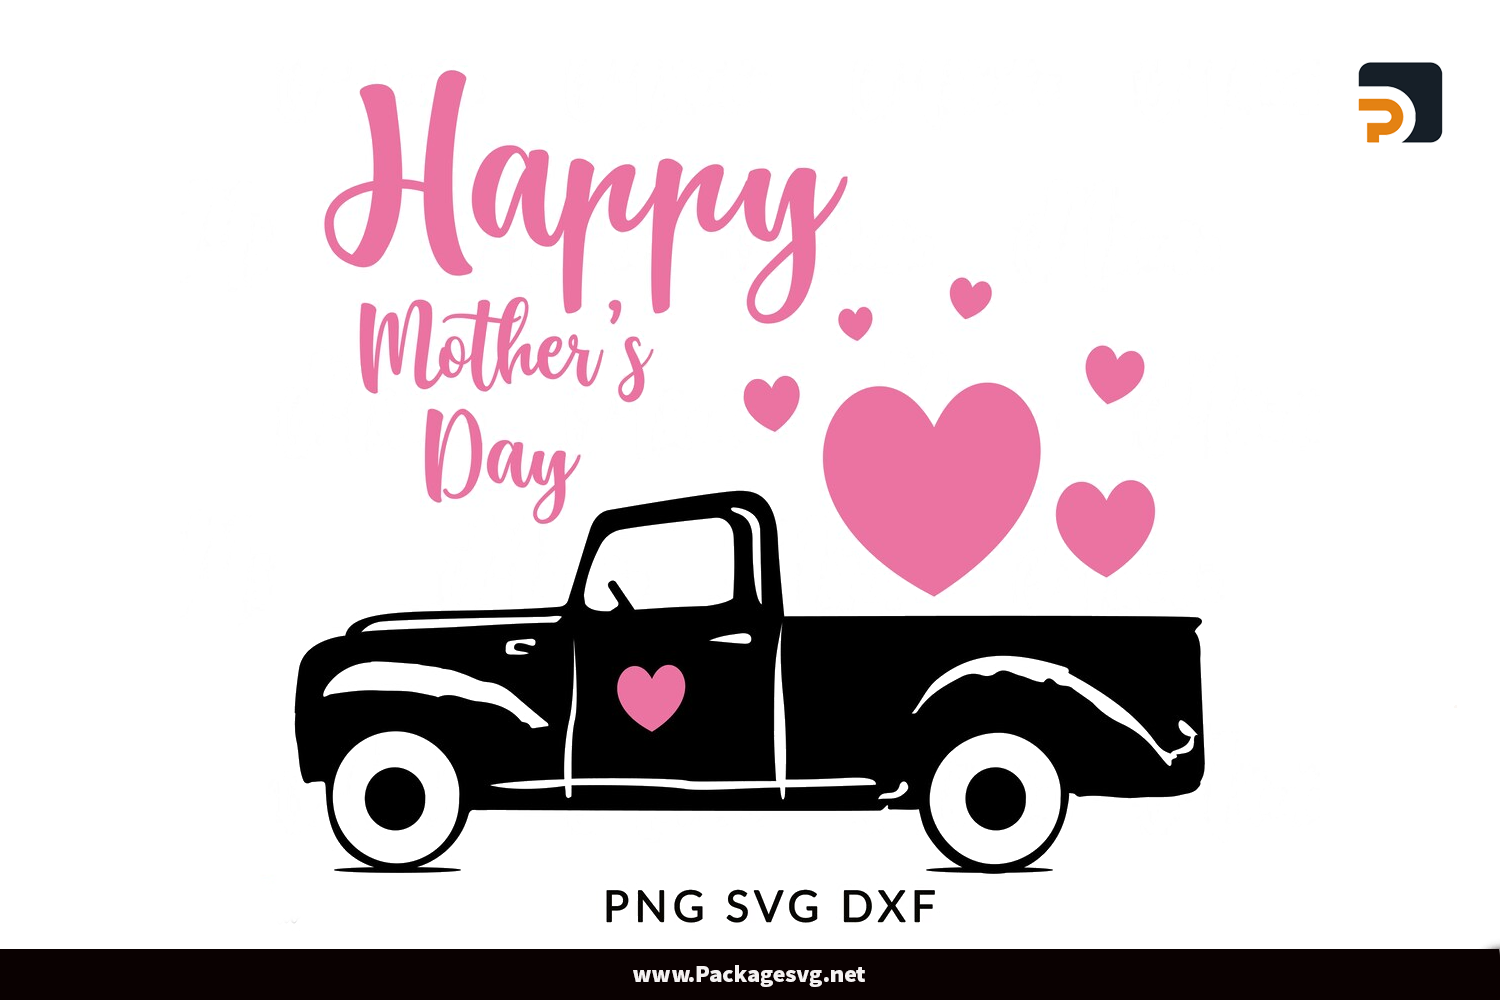 Happy Mothers Day Truck SVG